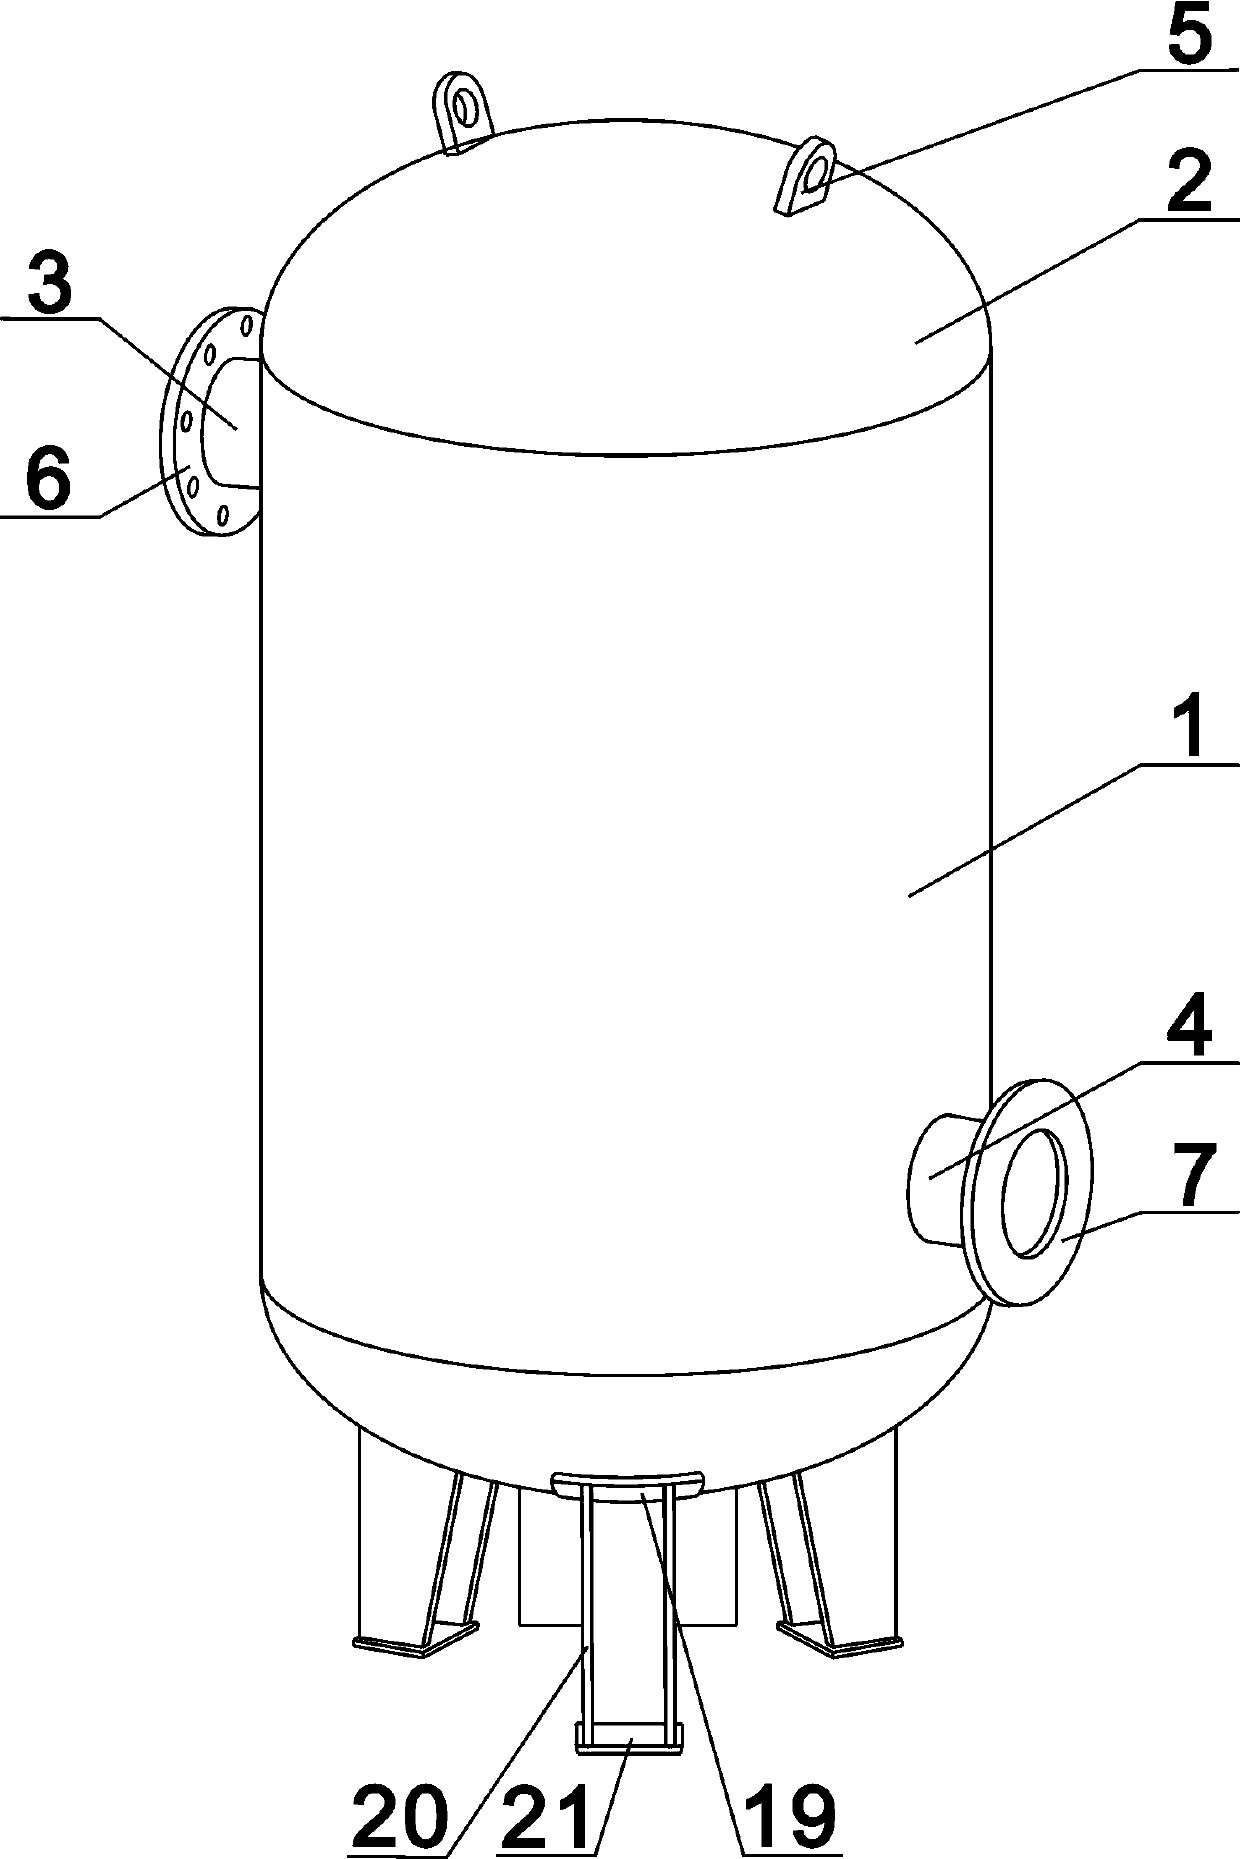 Chlorine buffer tank used for production of power cable